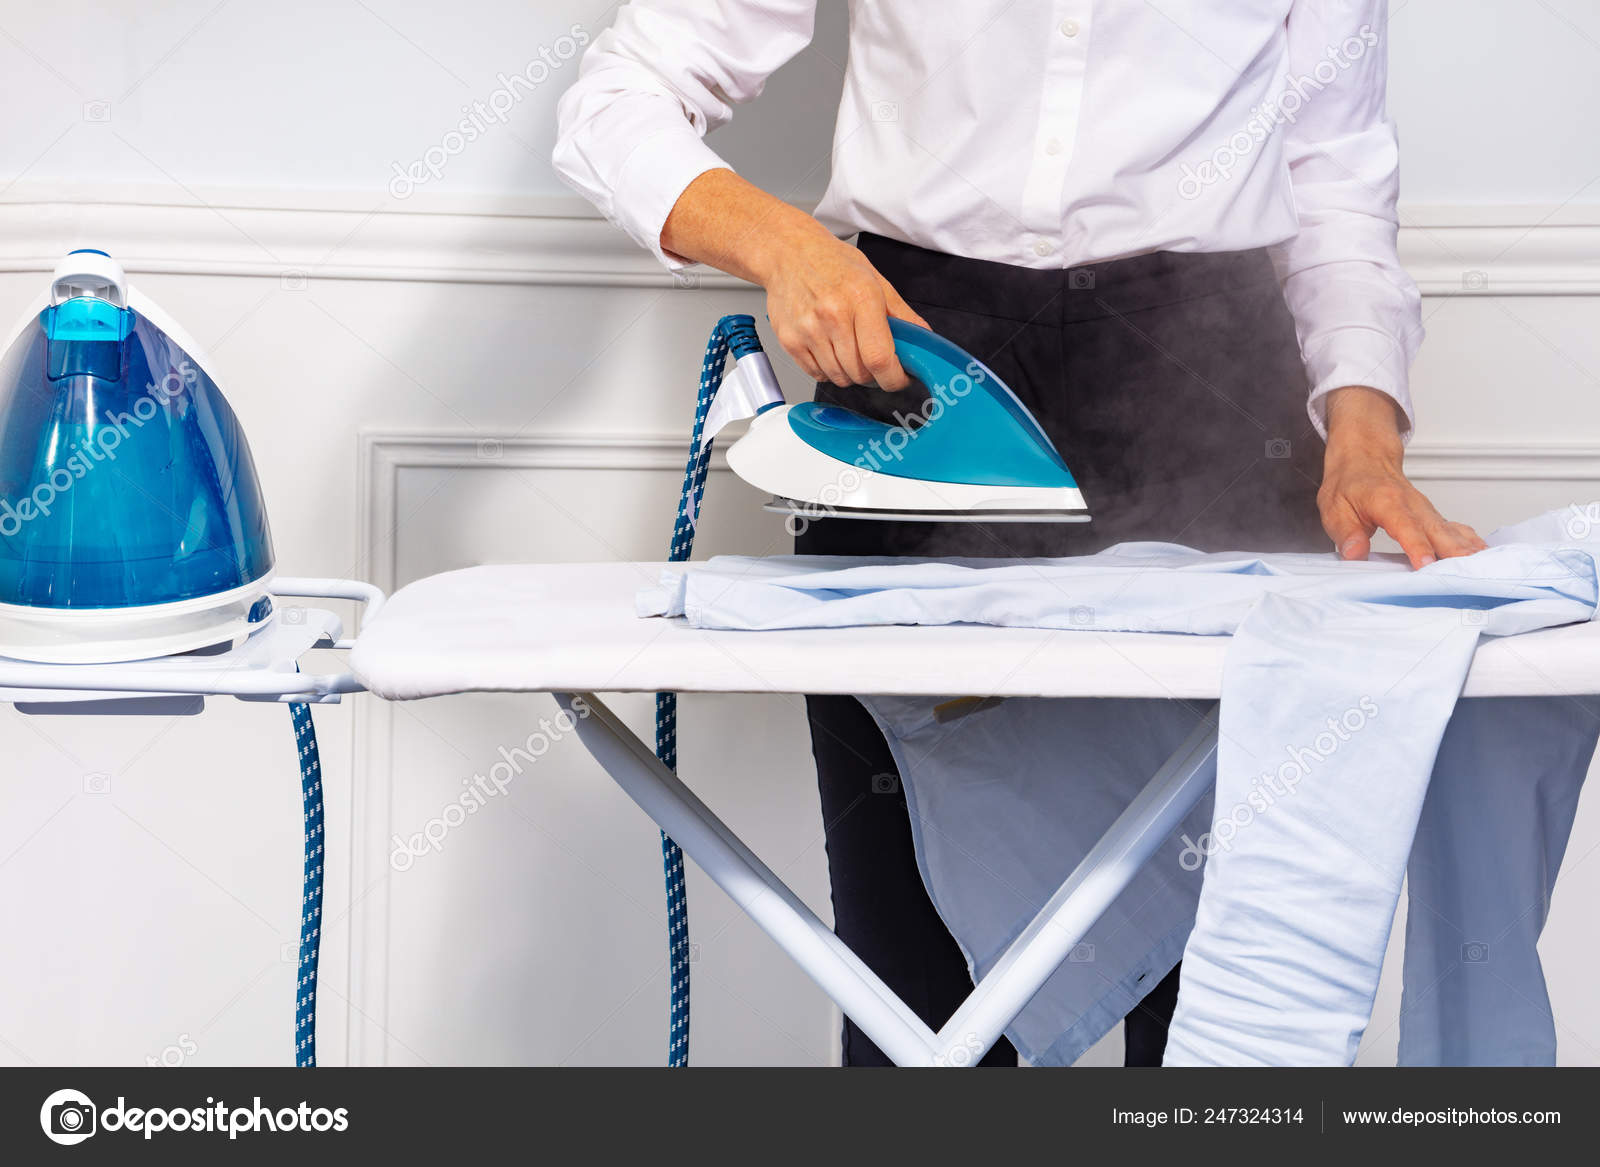 Close-up Of Woman's Hand Ironing Cloth On Ironing Board Stock